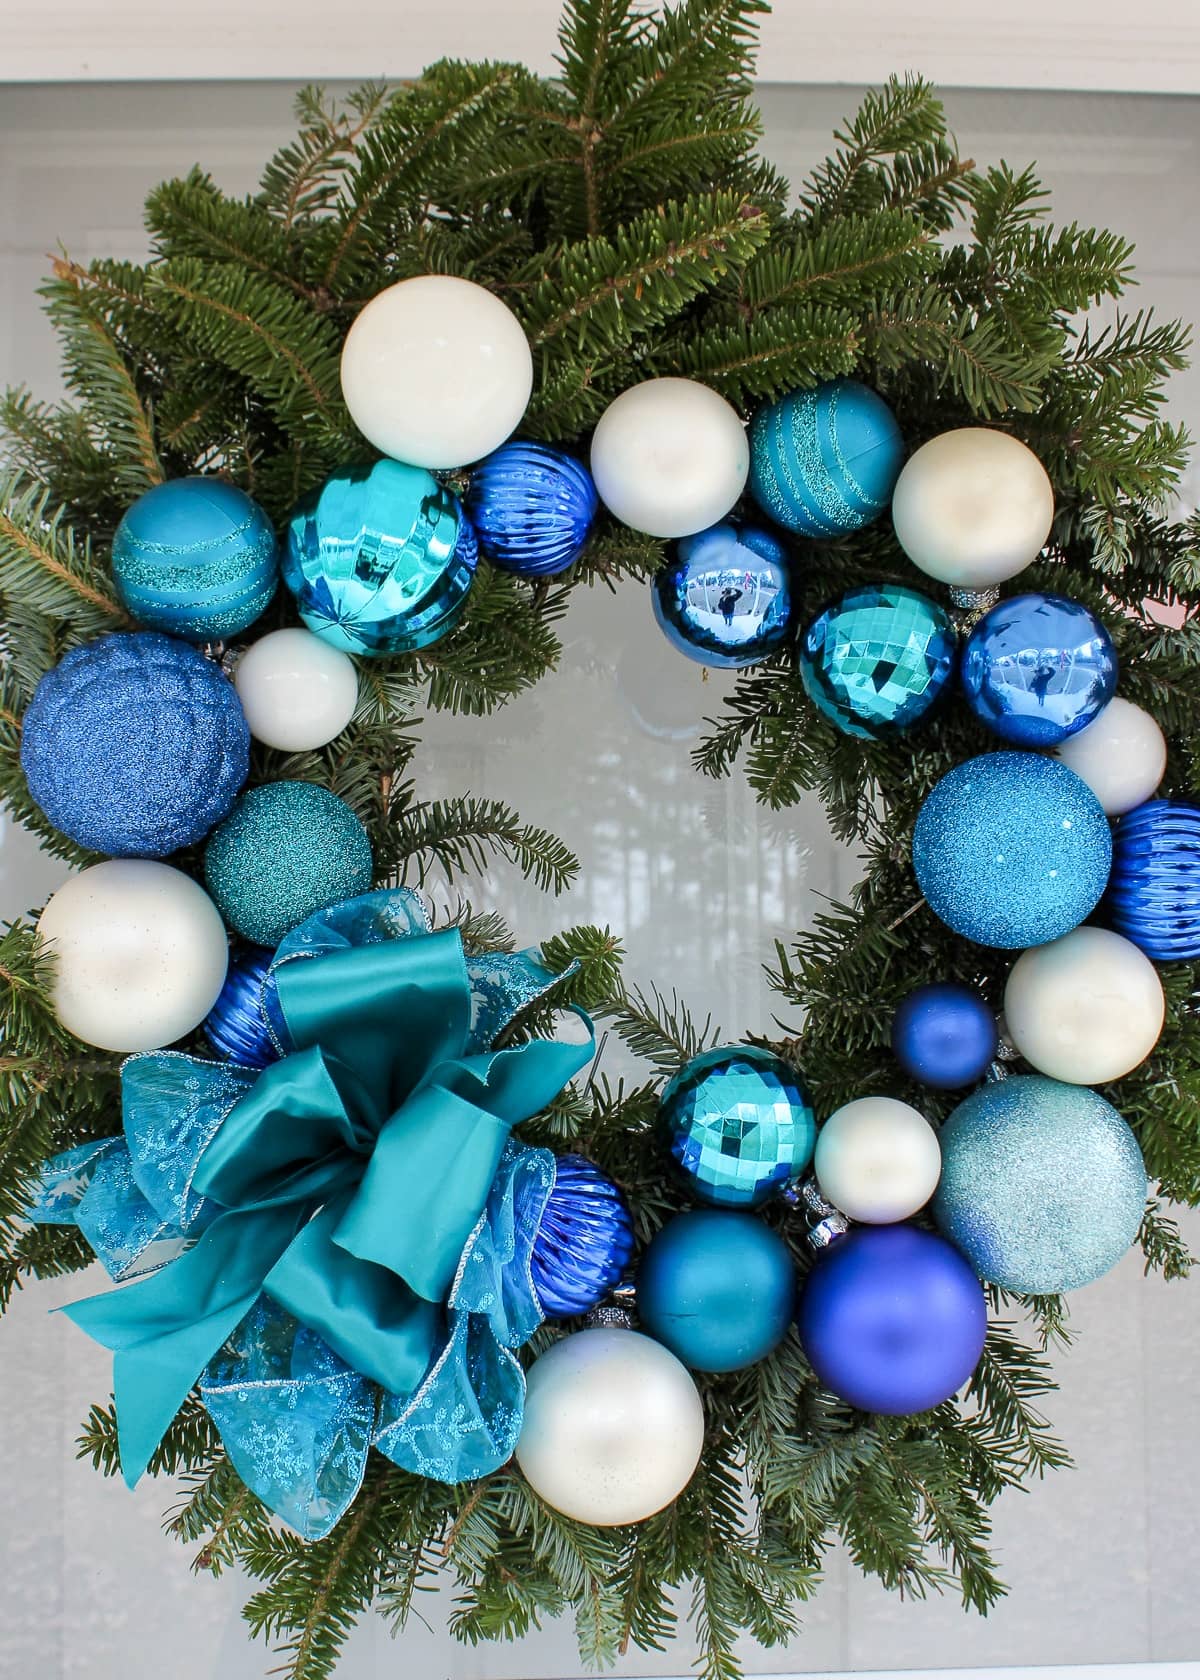 Turquoise, royal blue, and white ornaments on a pine wreath